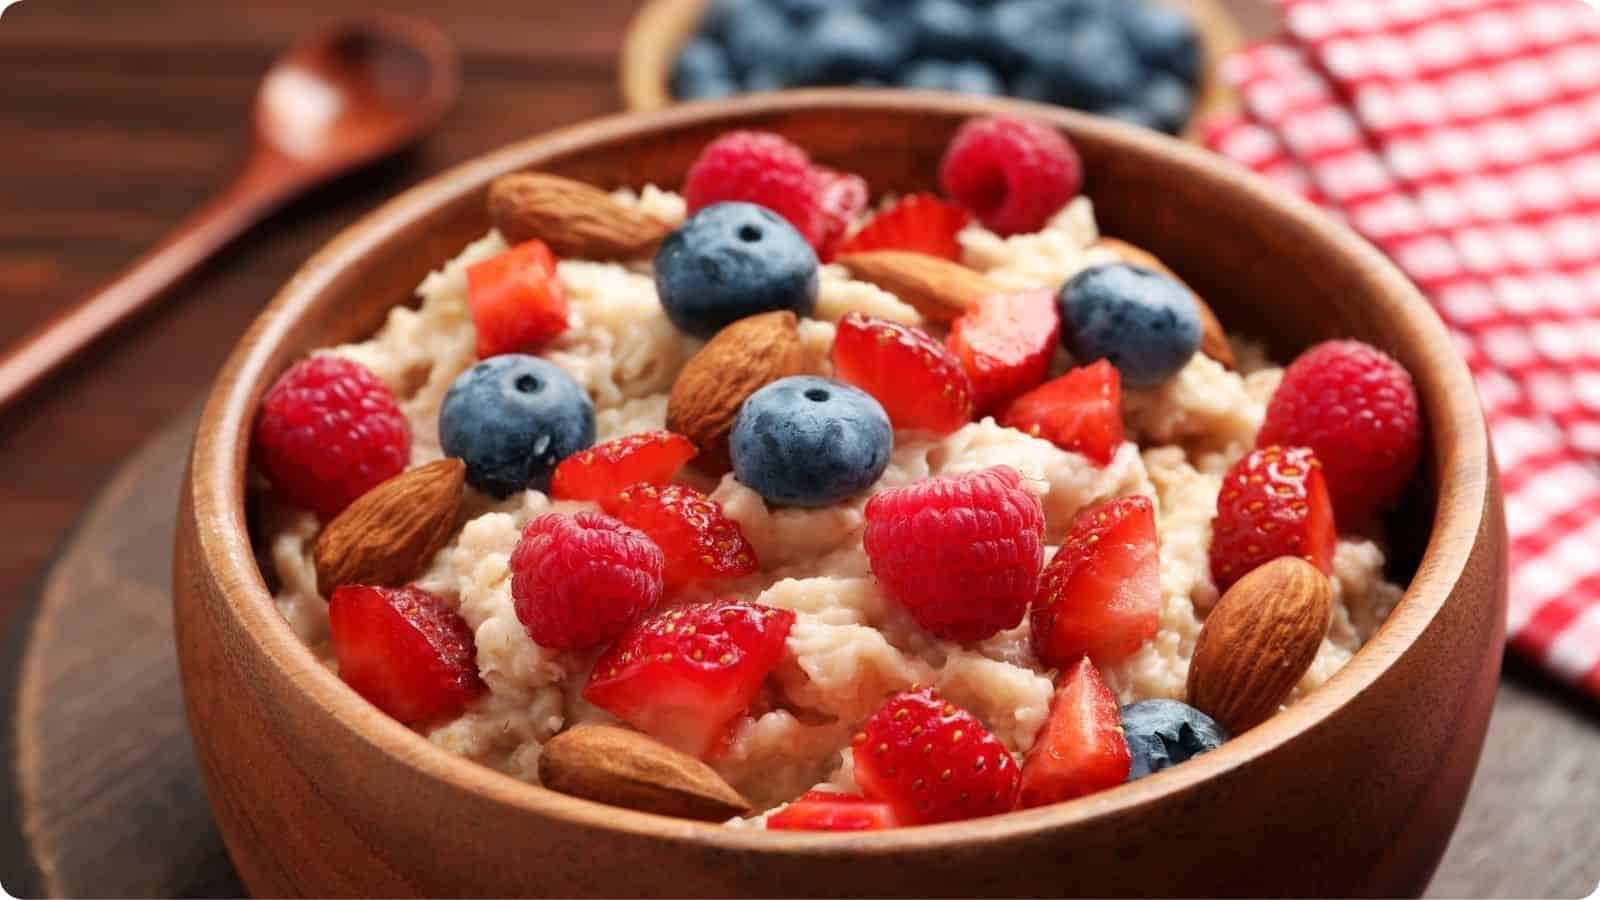 Clay pot bowl brimming with oatmeal, adorned with raspberries, walnuts, and blueberries, resting on a wooden surface.